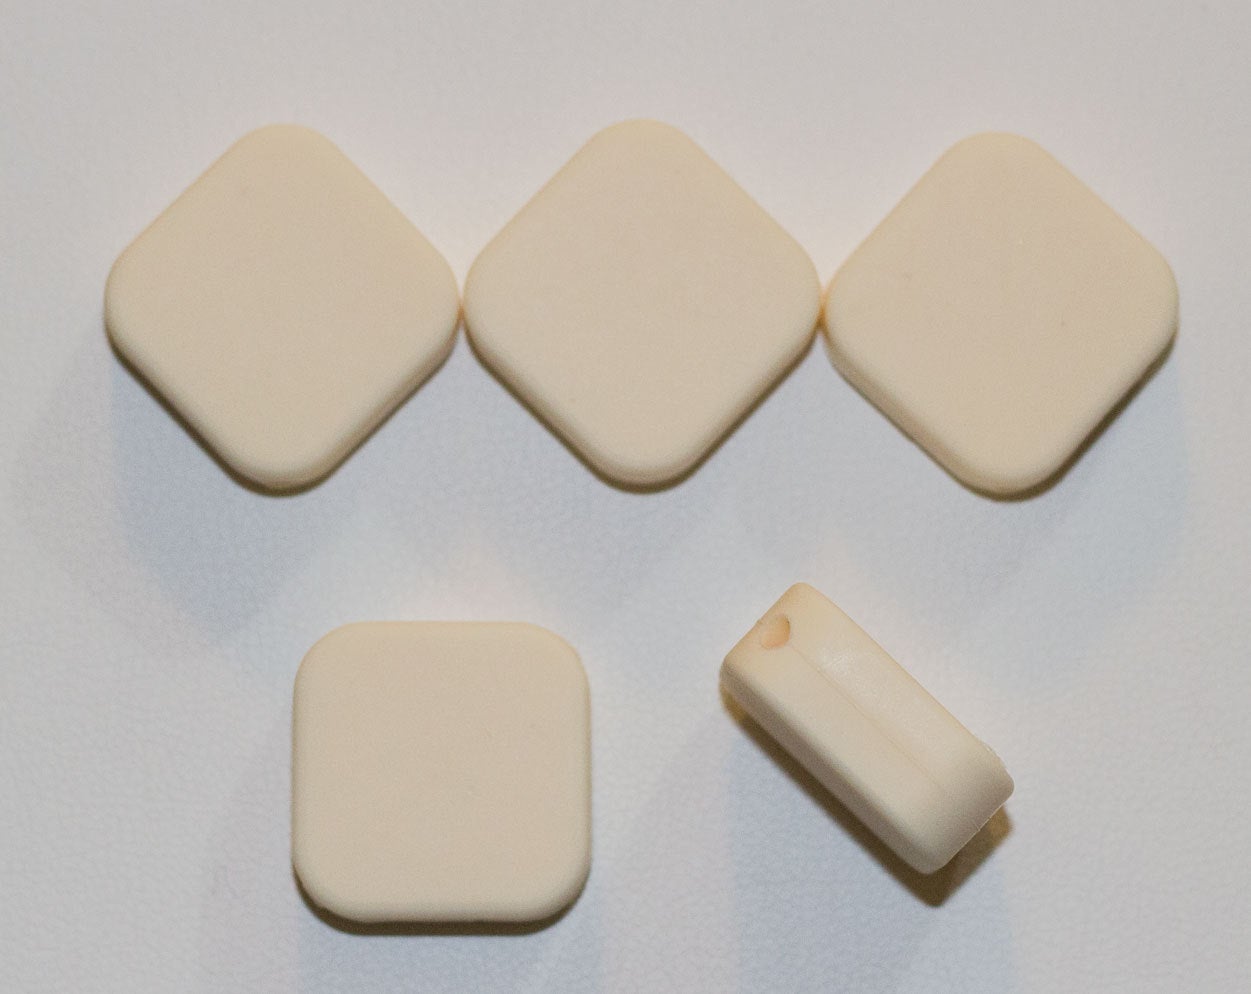 SALE - 1-5 Tile Silicone Beads in Ivory - Square with Rounded Edges - 20 mm x 20 mm x 8 mm